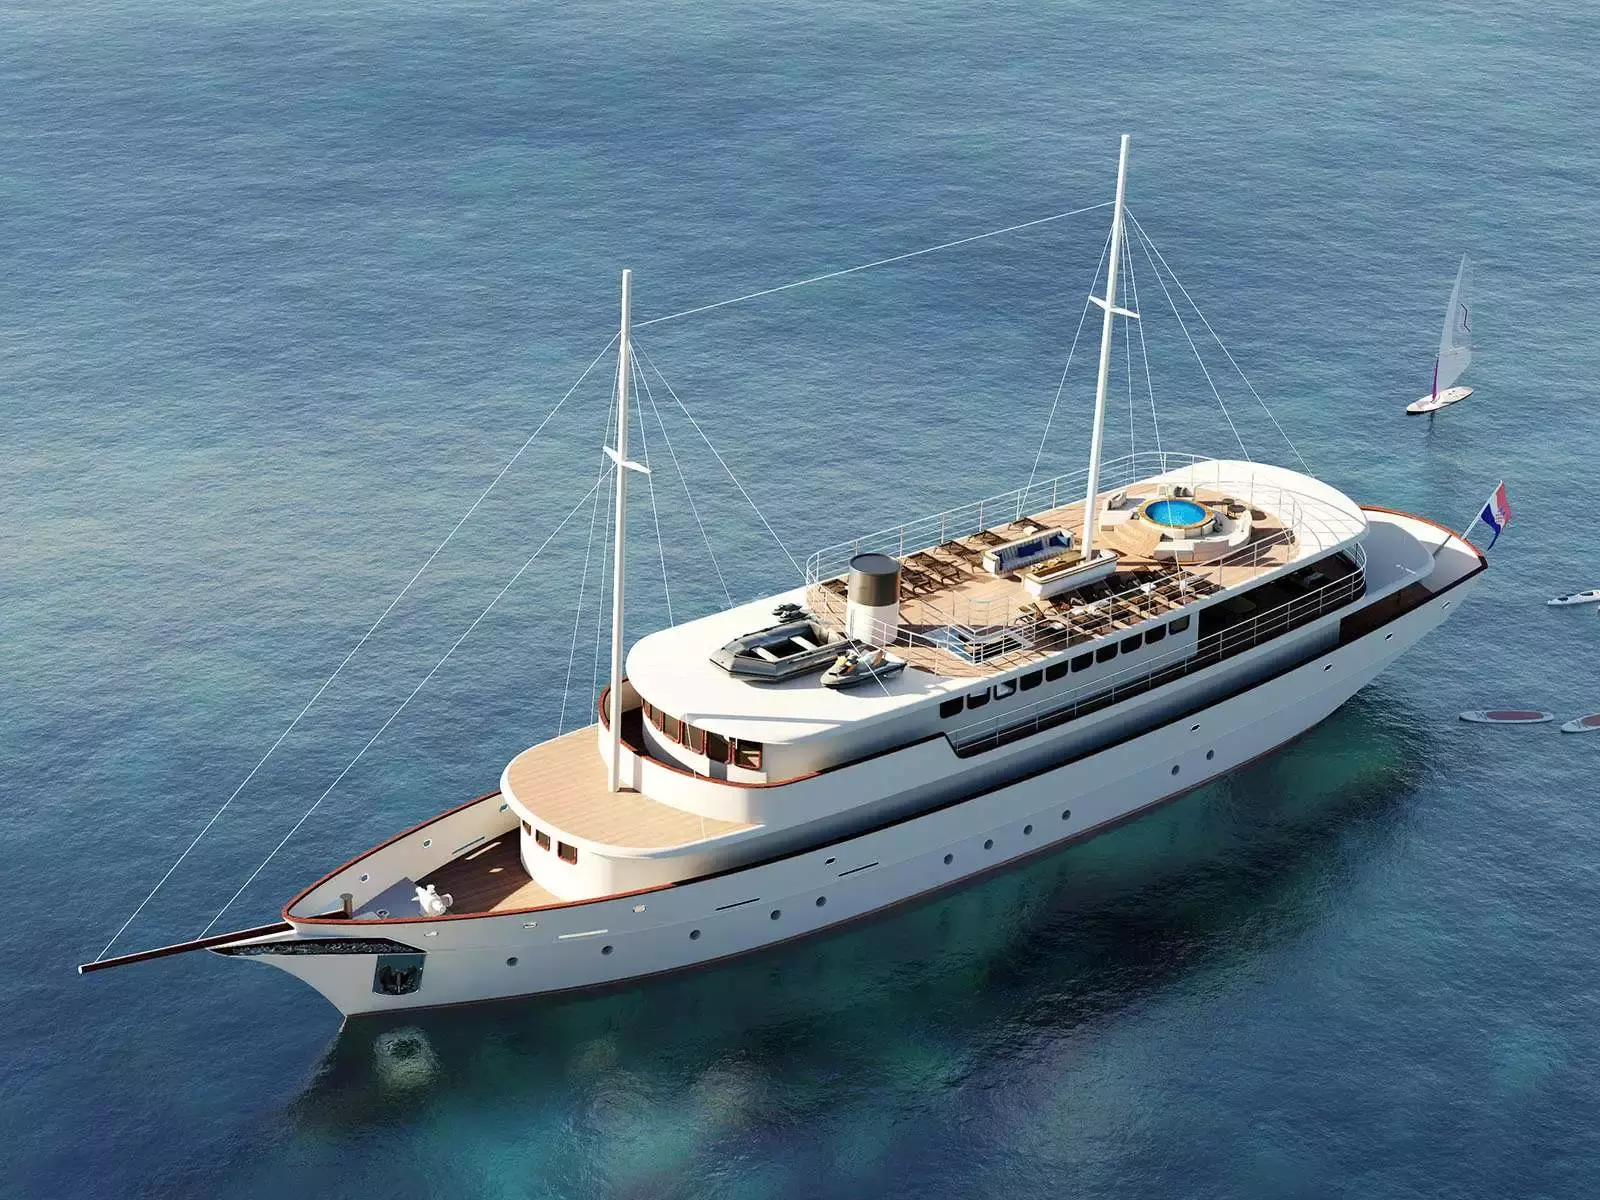 Bellezza by Custom Made - Top rates for a Rental of a private Superyacht in Croatia